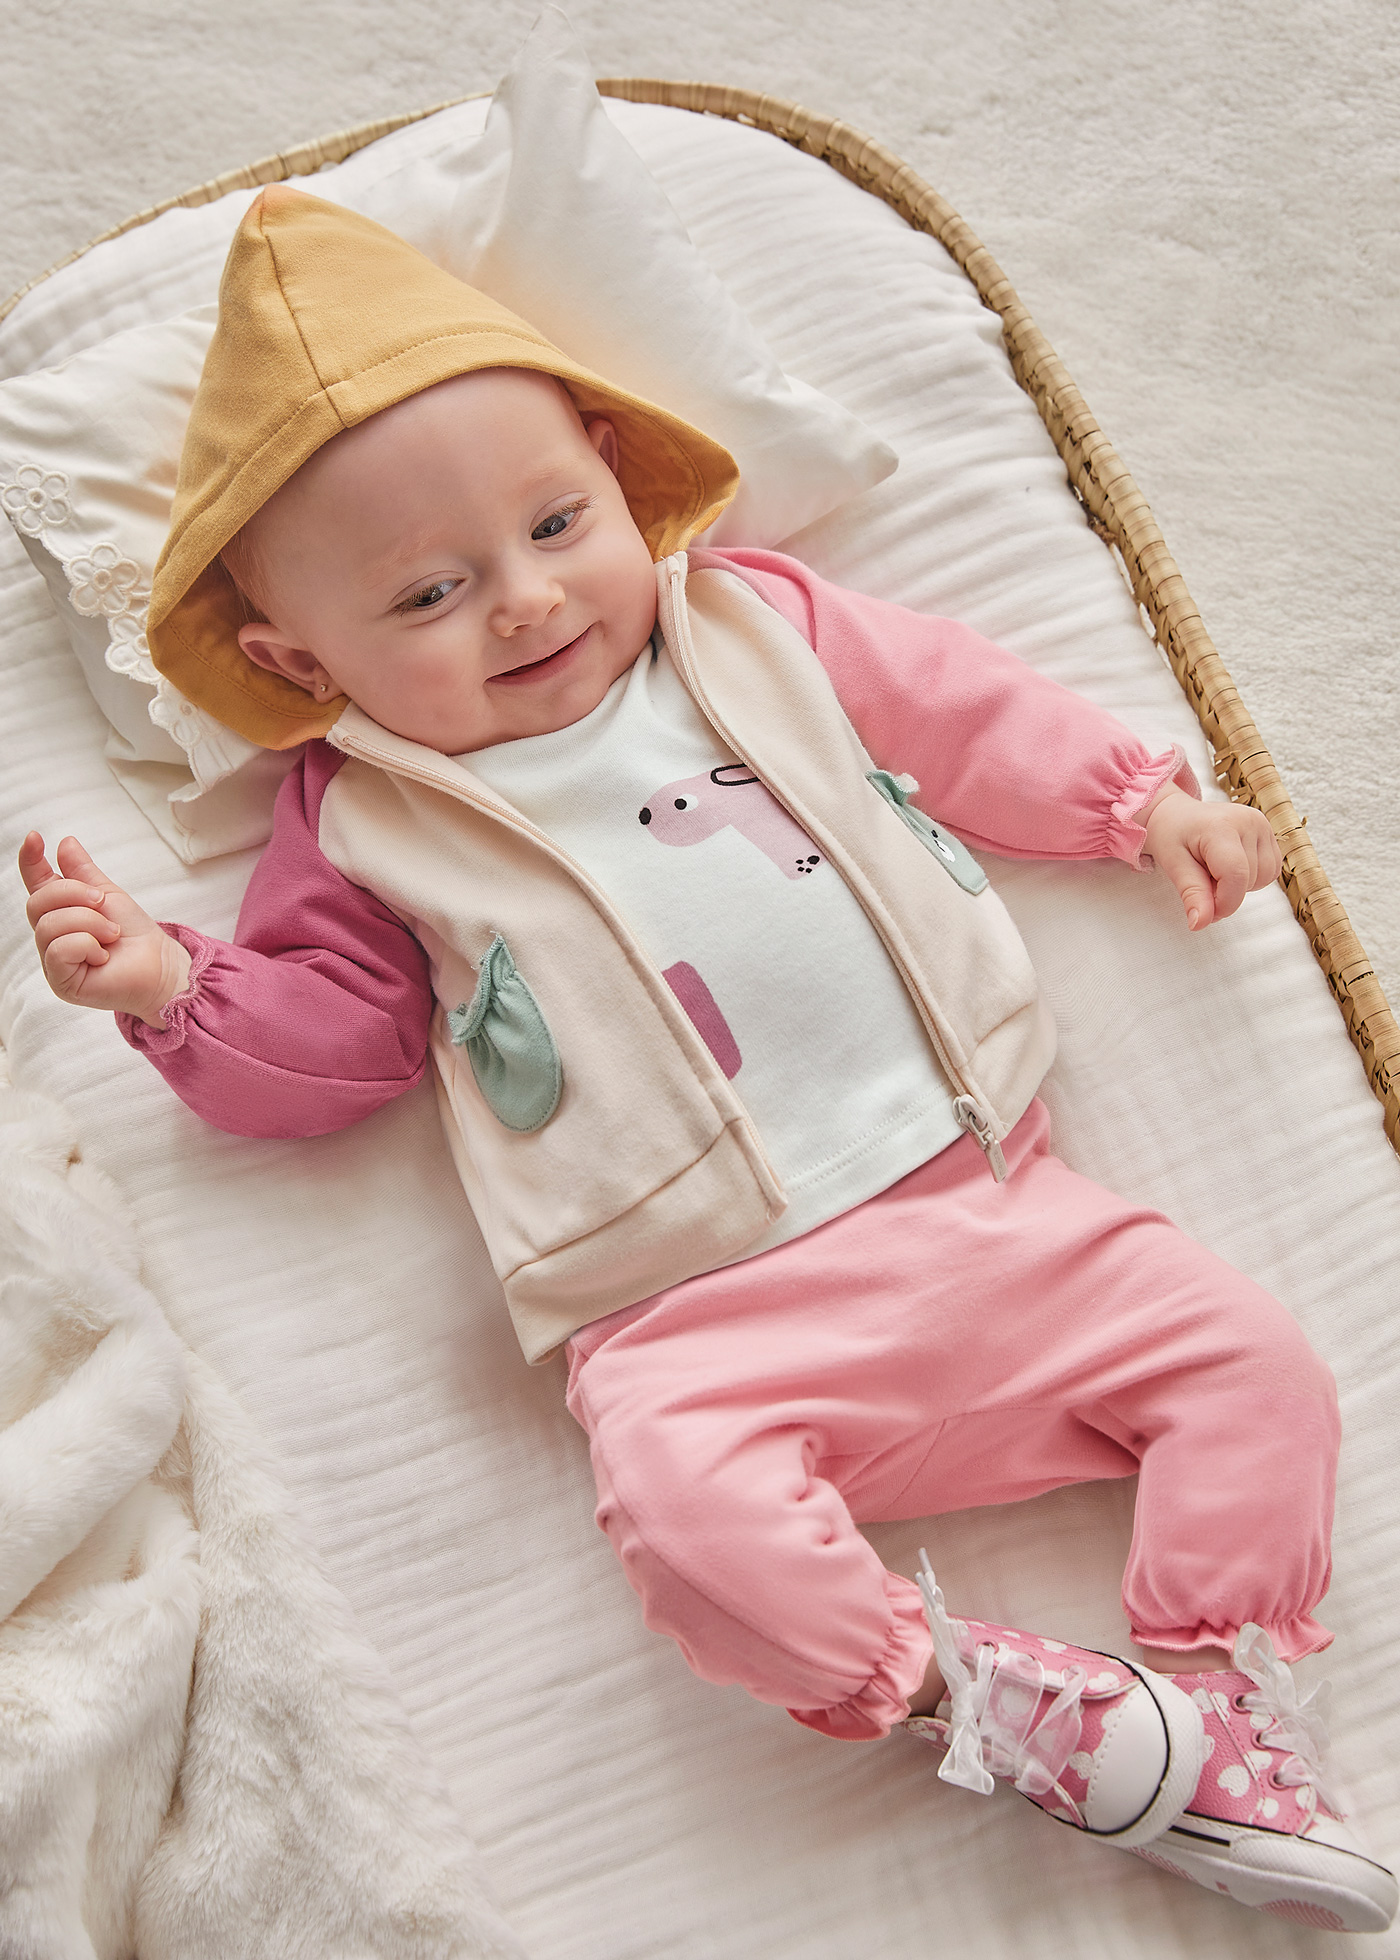 Blóm Baby Sweatsuit Toddler Outfit Separates (3M-3Y) – Nordic Baby Boutique